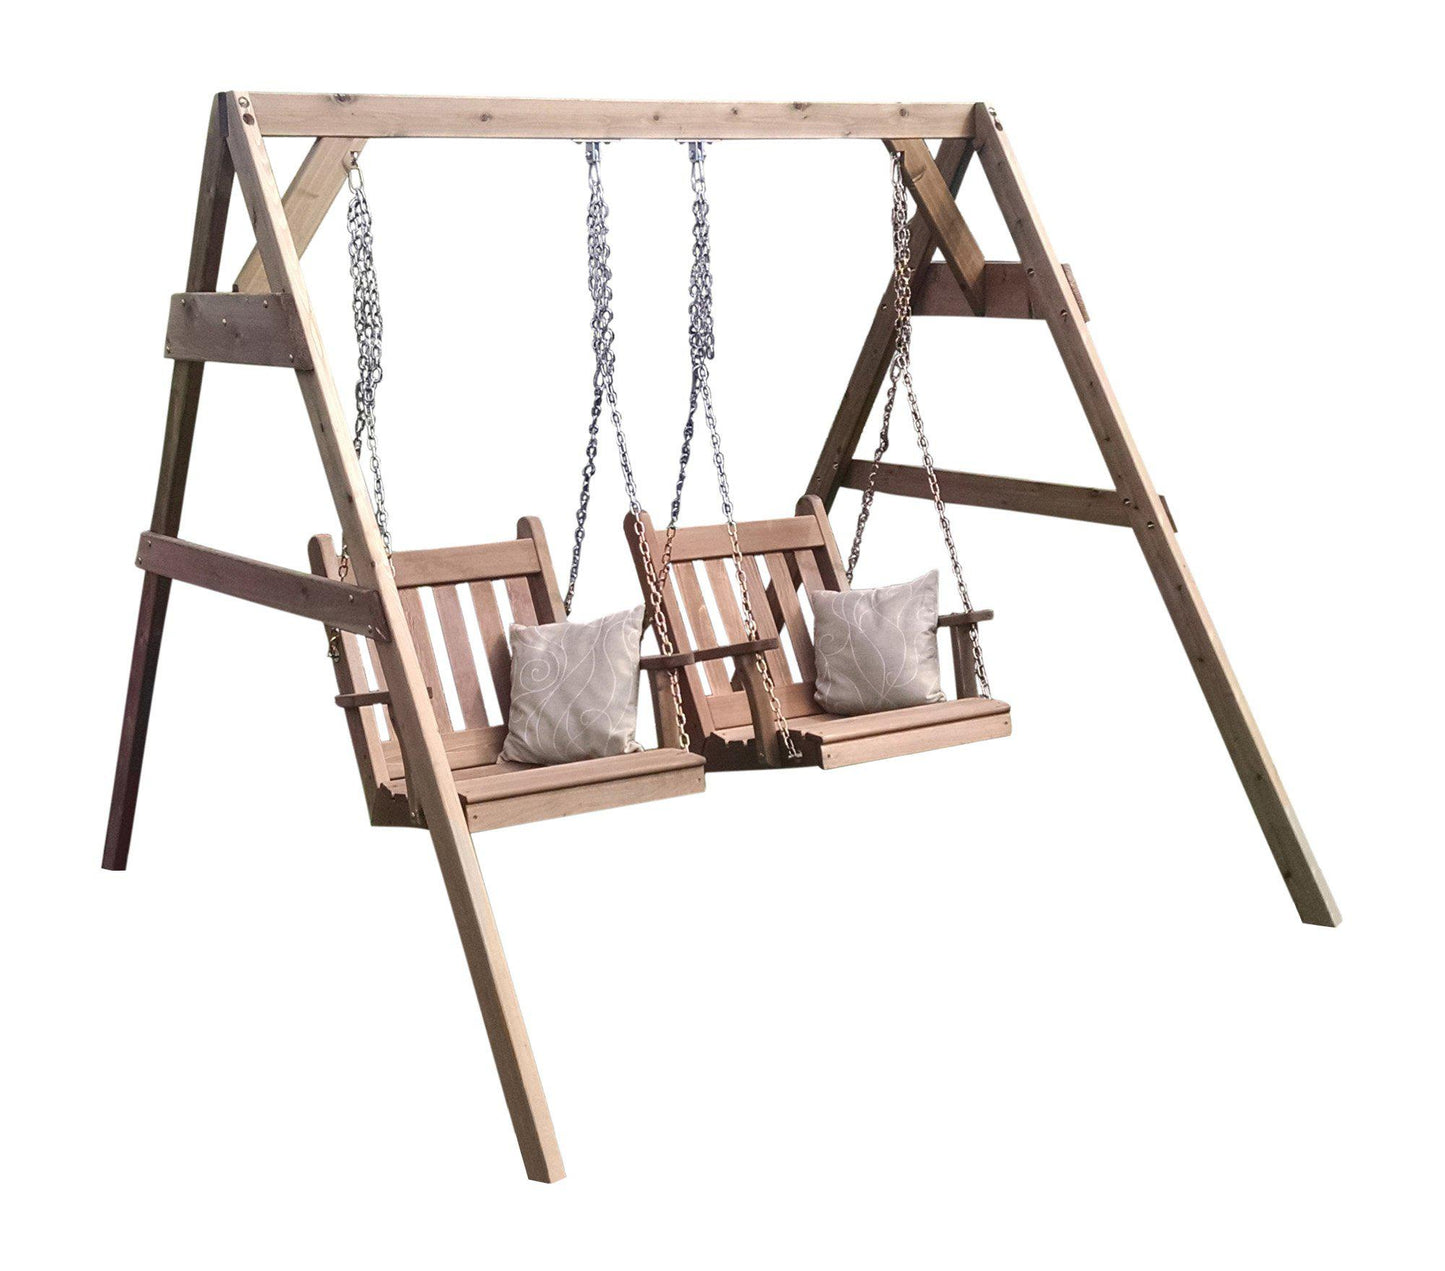 A&L Furniture CO. 5ft. 2x4 A-Frame  Red Cedar Swing Stand for 2 Chair Swings 600 lbs Max Weight Capacity (Hangers Included) - LEAD TIME TO SHIP 2 WEEKS